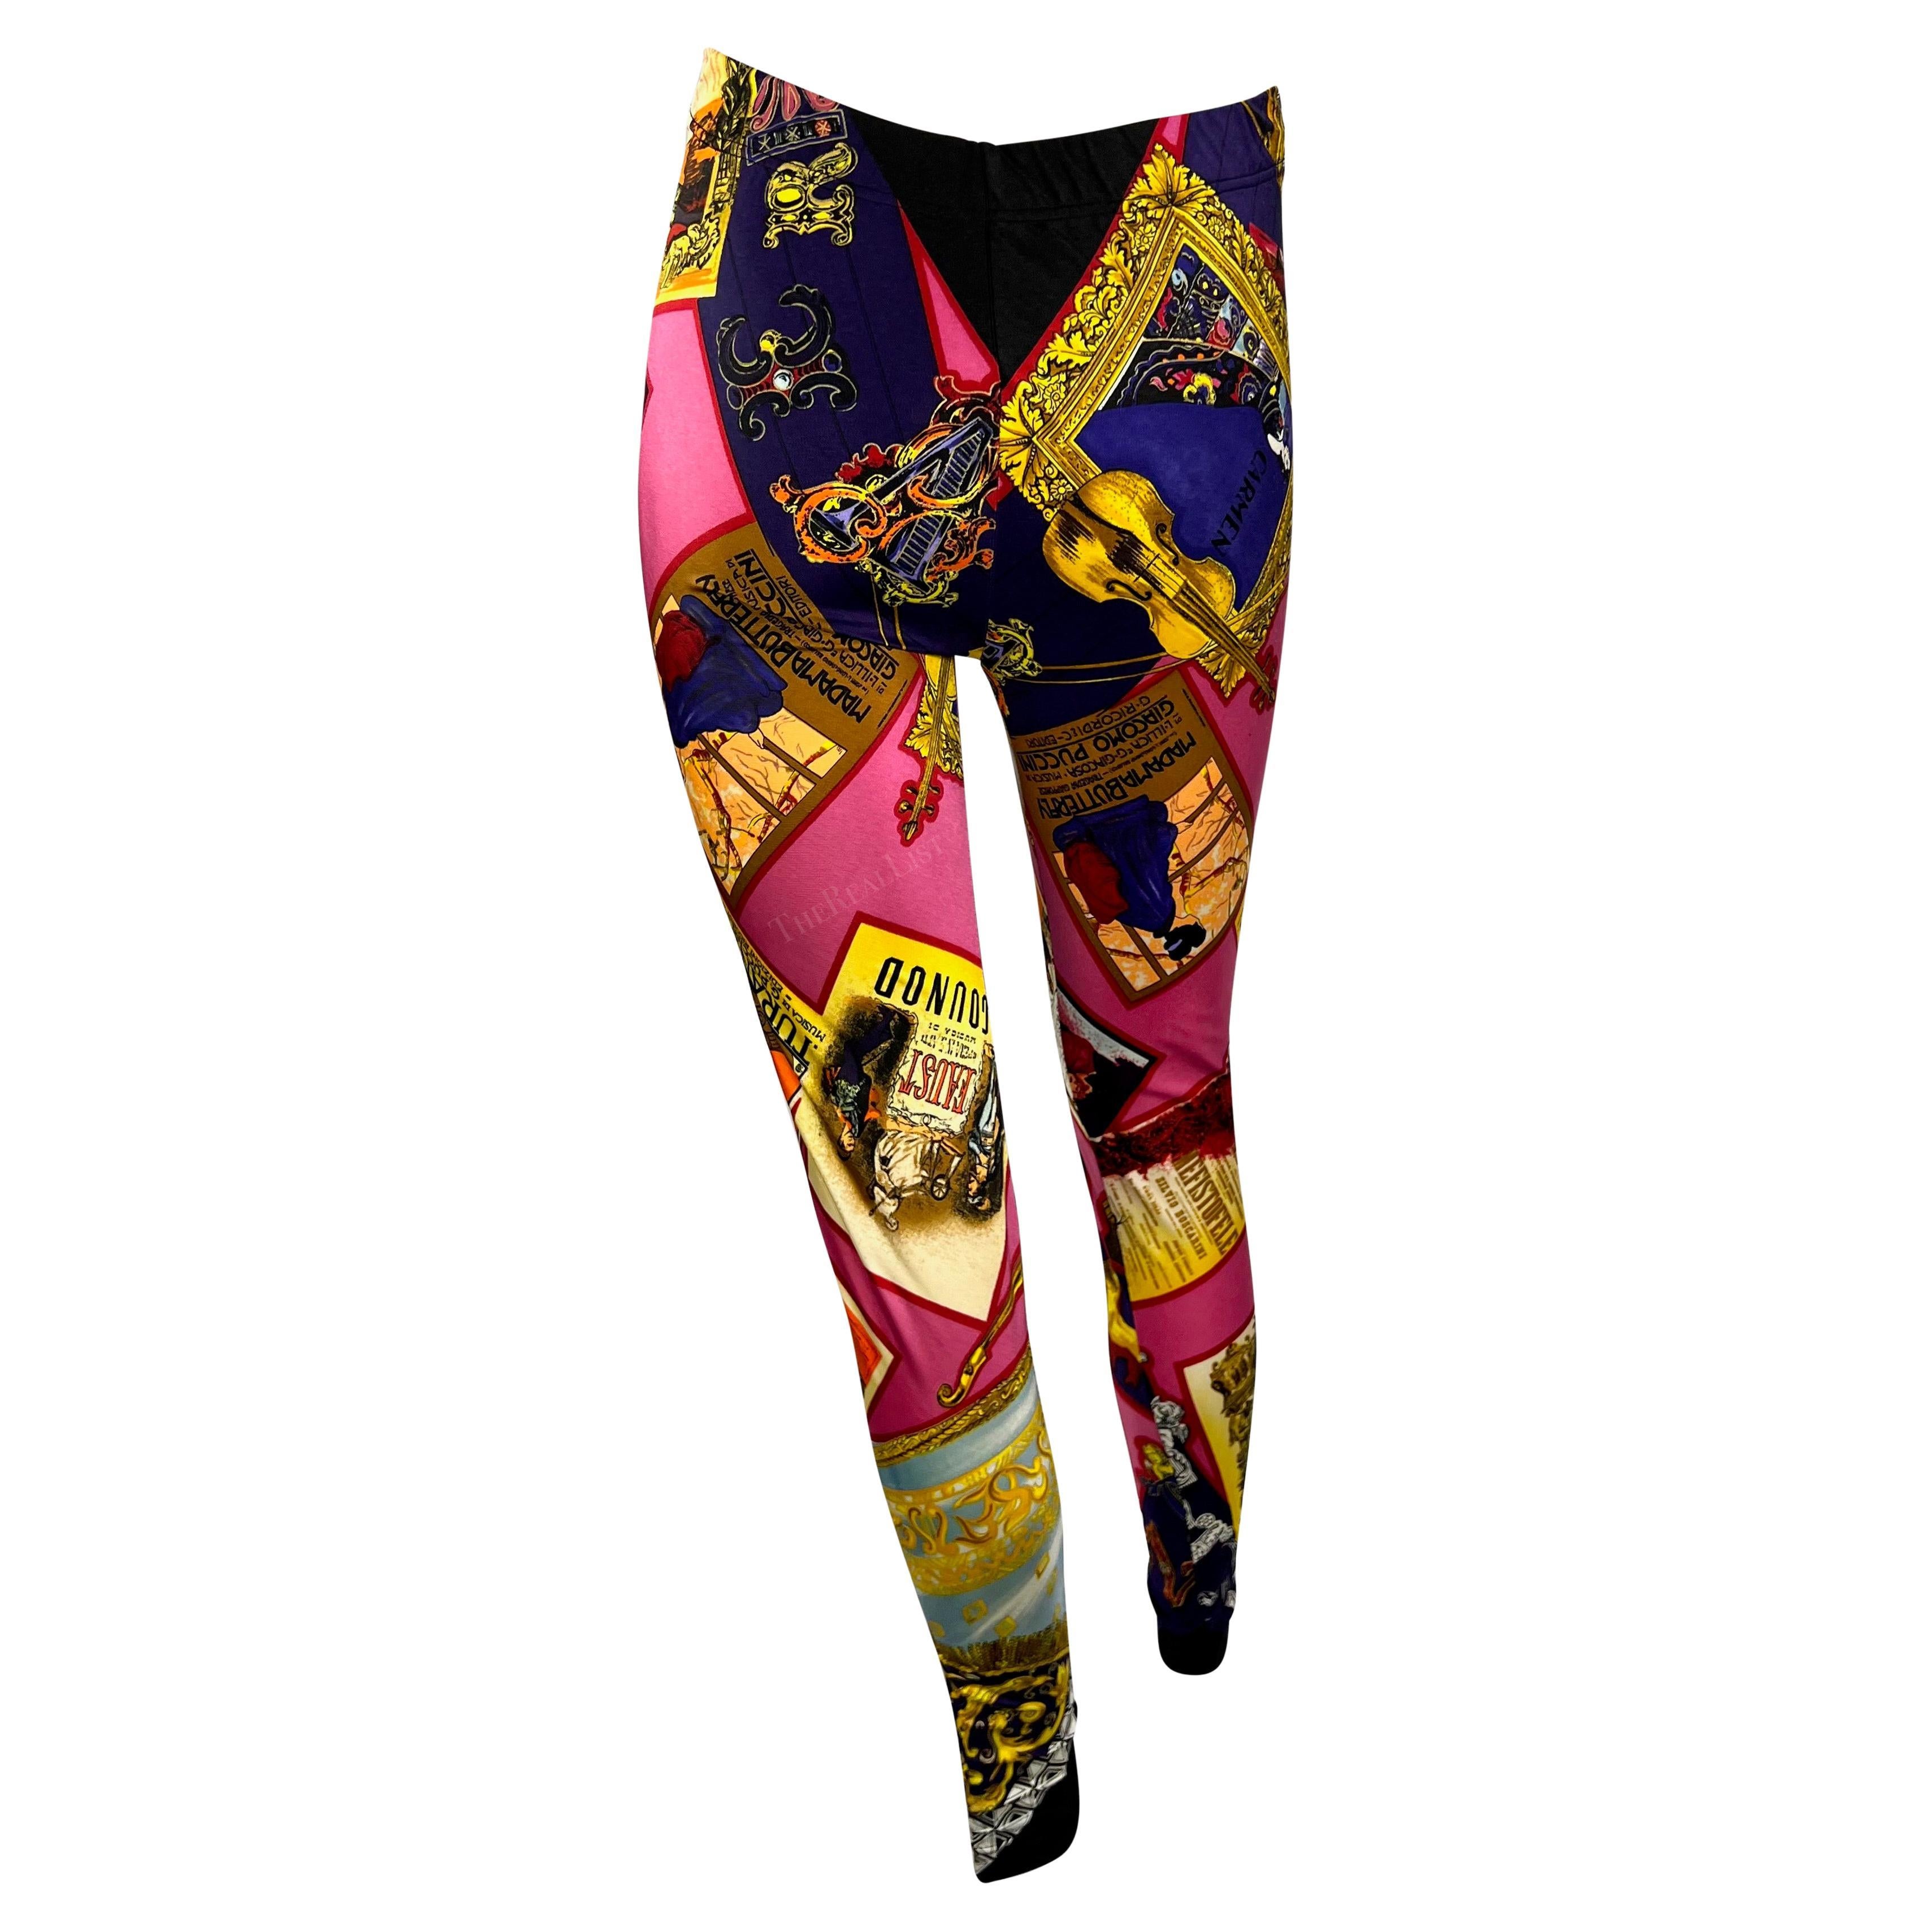 Women's 1991 Gianni Versace Opera Playbill Print Pink Tights Legging Pants For Sale